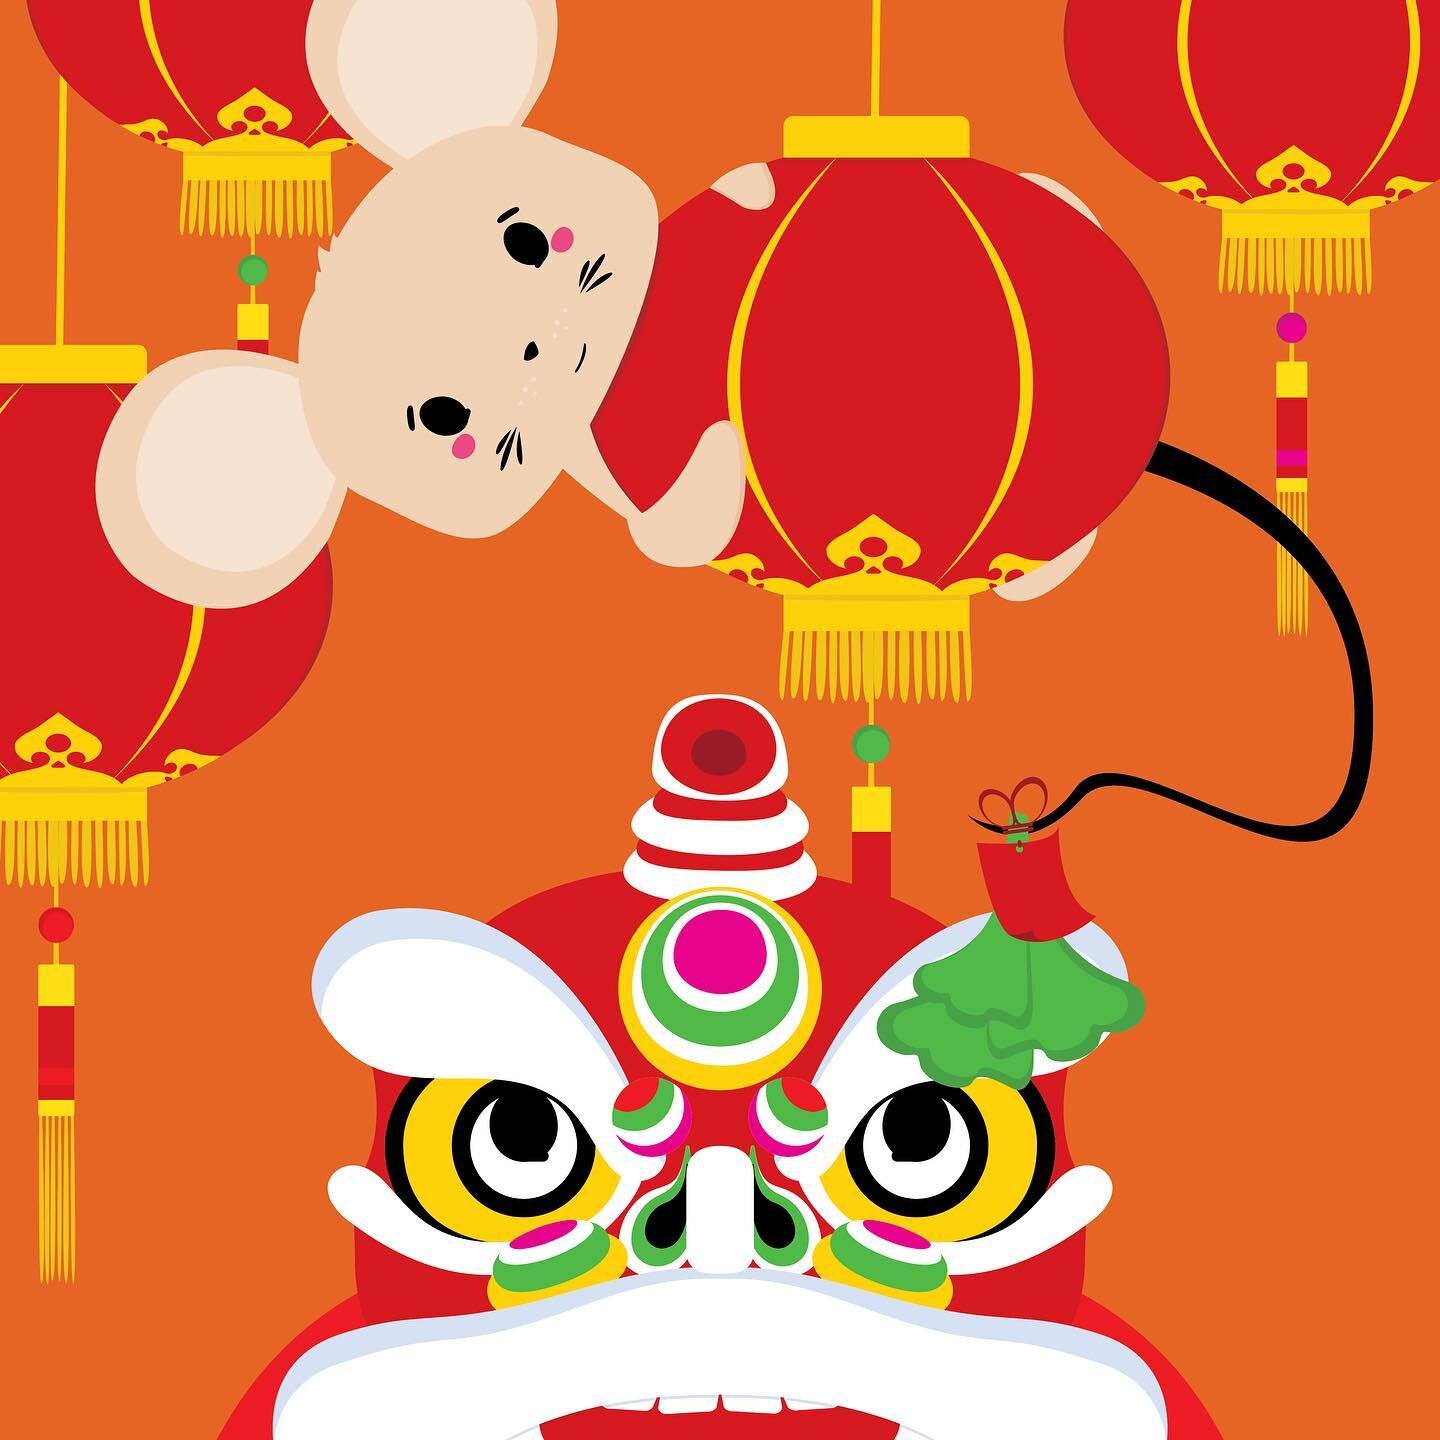 The prosperous rat is here!🐀 新年快乐! 恭喜发财!🏮🍊
Happy Chinese New Year of the Metal Rat! A year of prosperity and new beginnings!

Today is a new day in the new year according to the Chinese zodiac. And what a year to look forward to! The Rat was the f